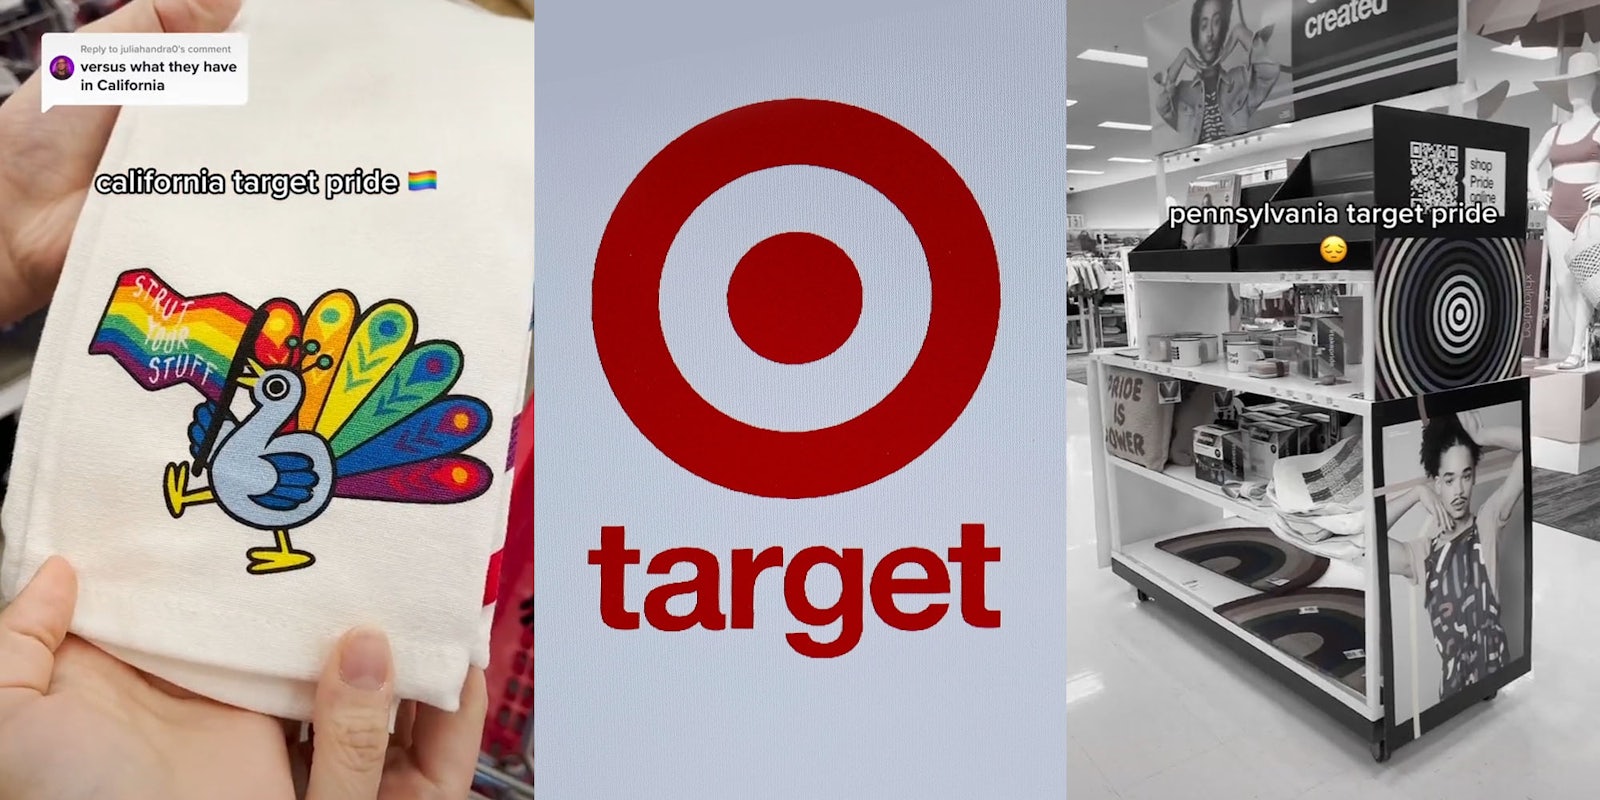 https://uploads.dailydot.com/2022/06/target-pride-collections-compared.jpg?q=65&auto=format&w=1600&ar=2:1&fit=crop